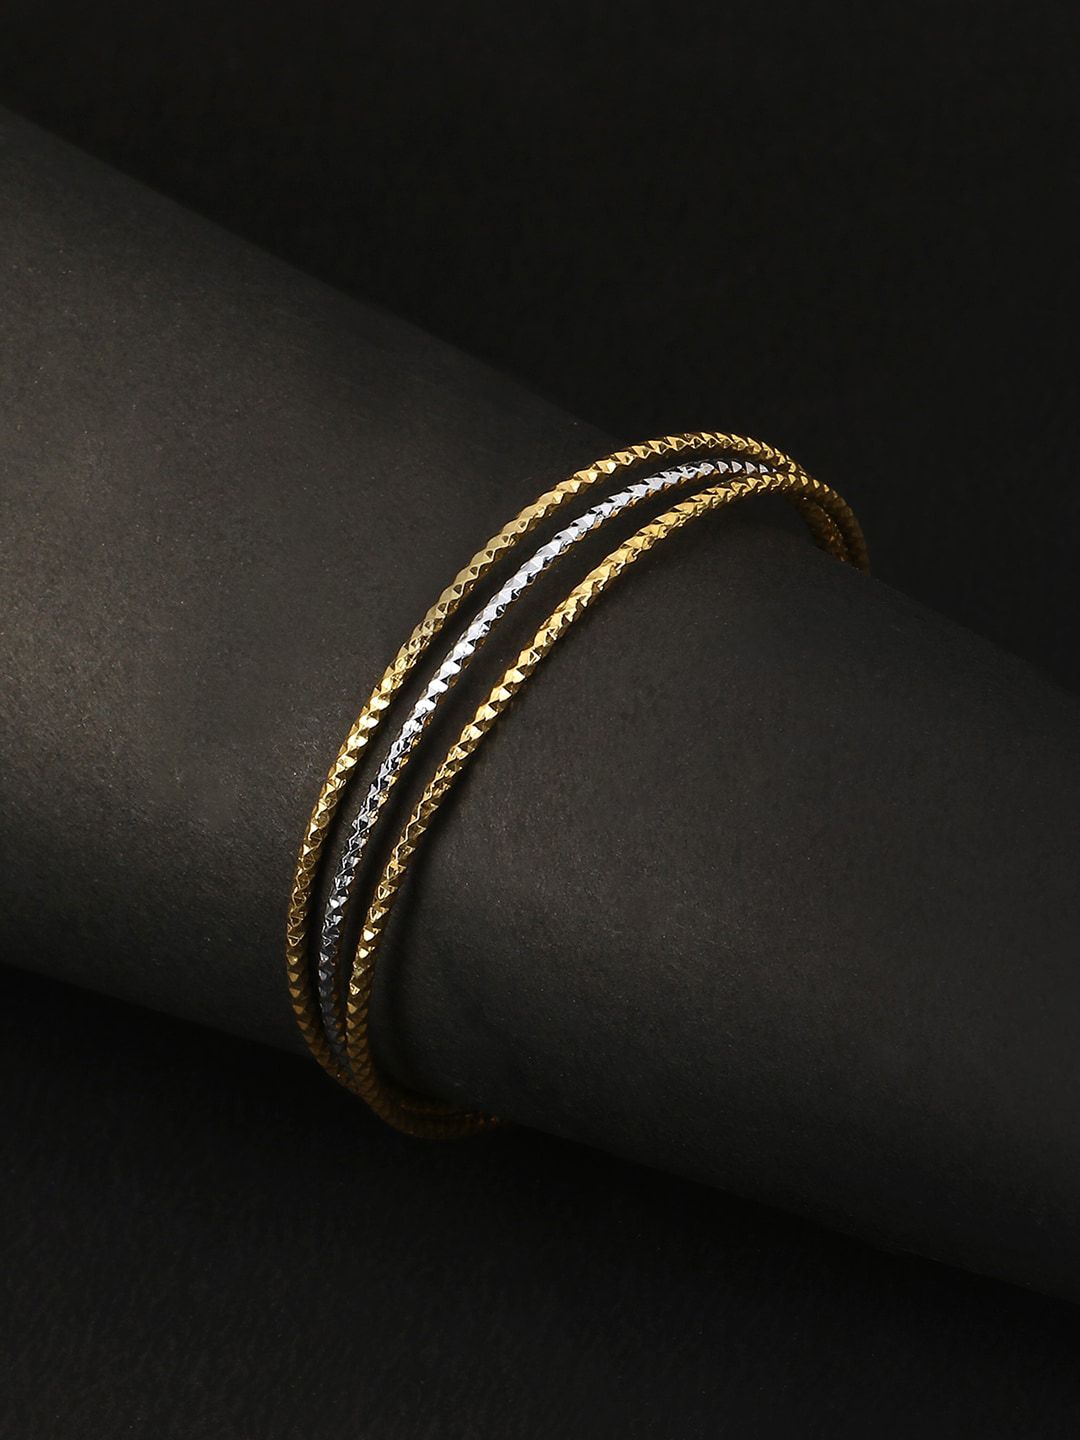 Adwitiya Collection Gold-Toned Bracelet Price in India